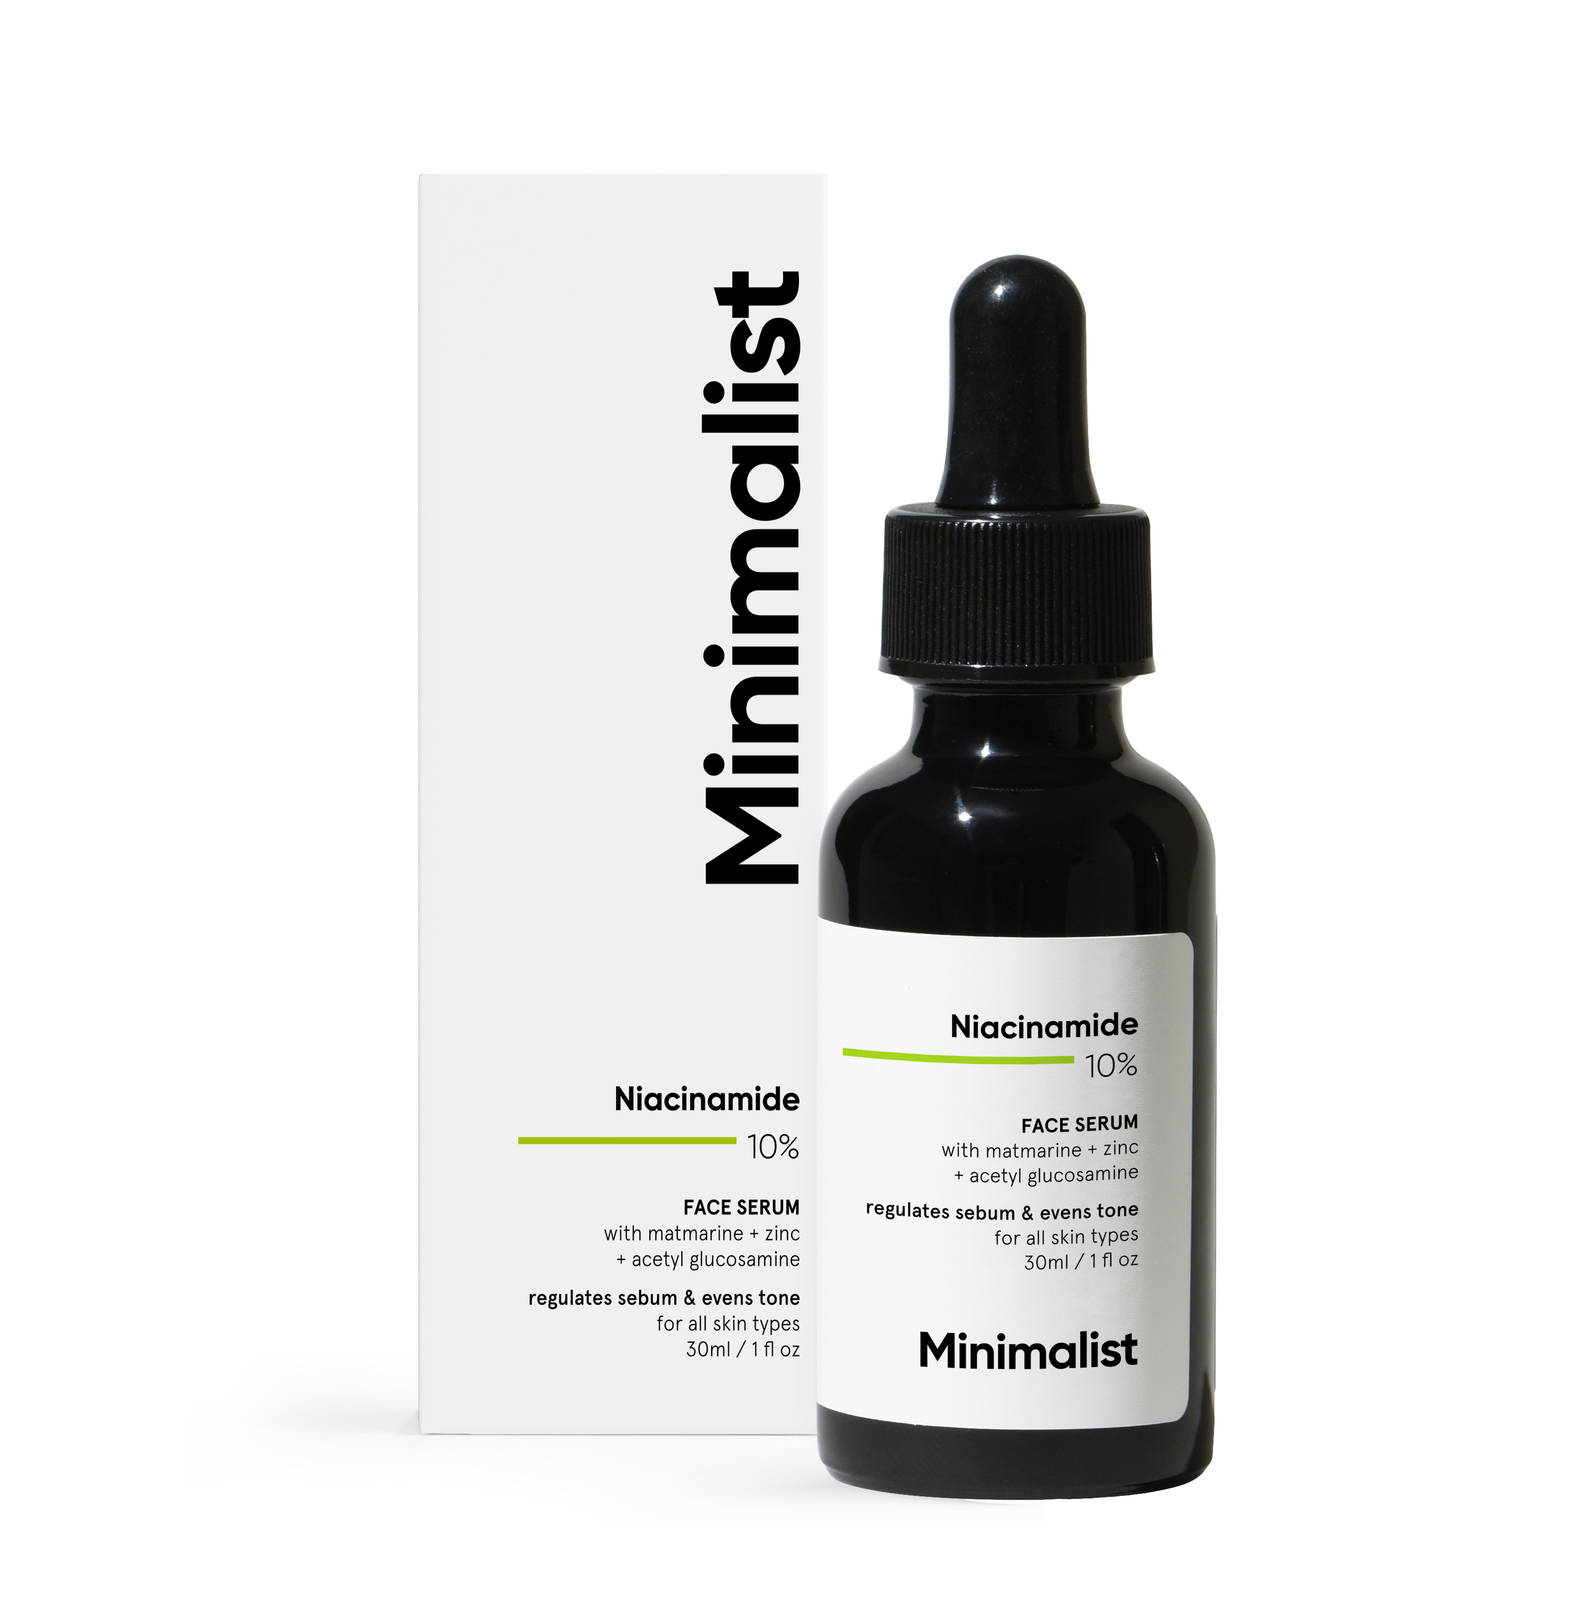 Minimalist 10% Niacinamide Face Serum for Oily and Acne Prone Skin | 30ml